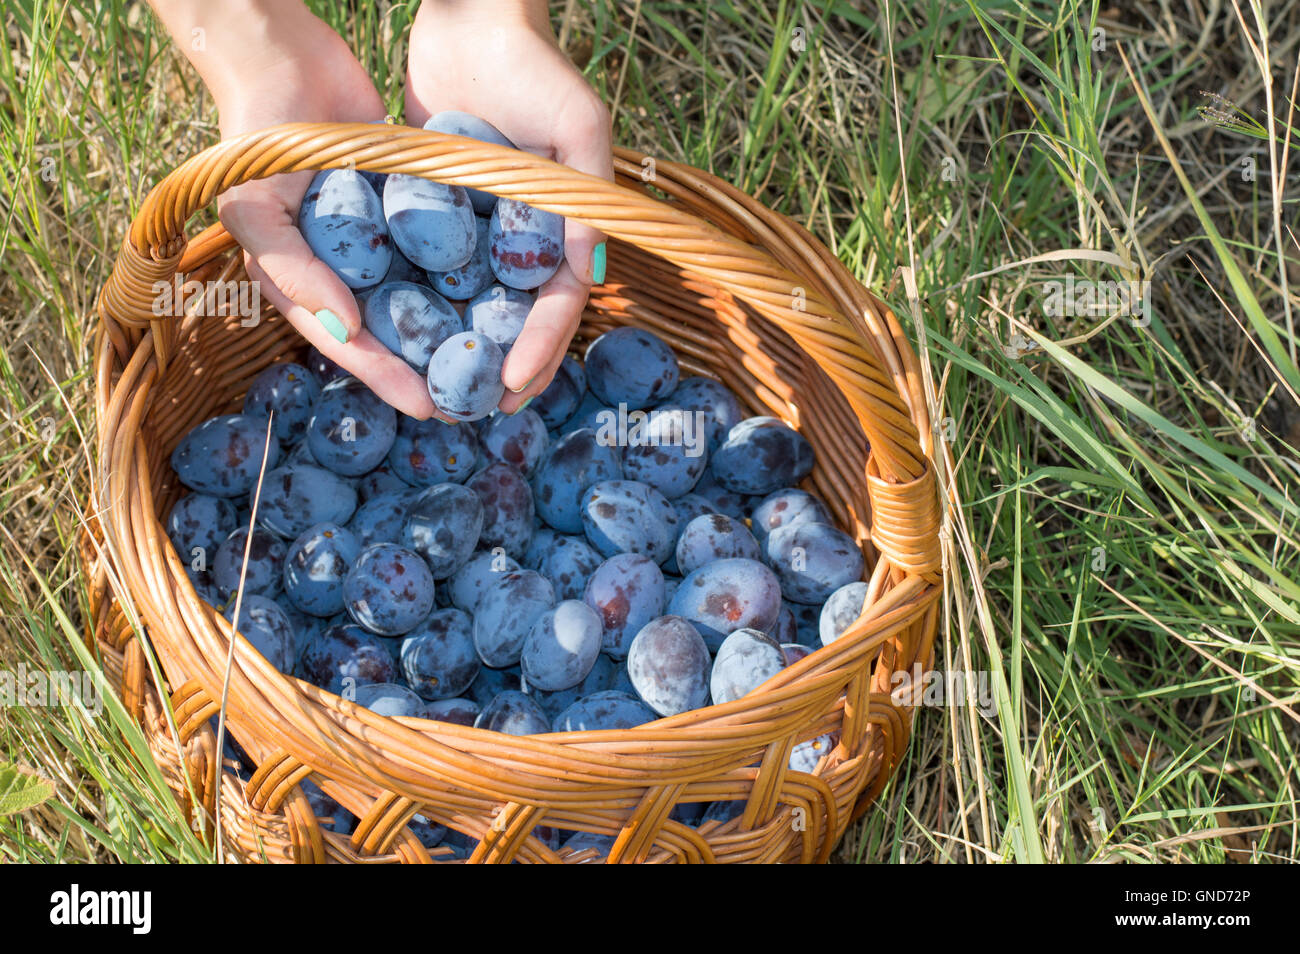 Persons hands putting fresh picked plums into the basket Stock Photo